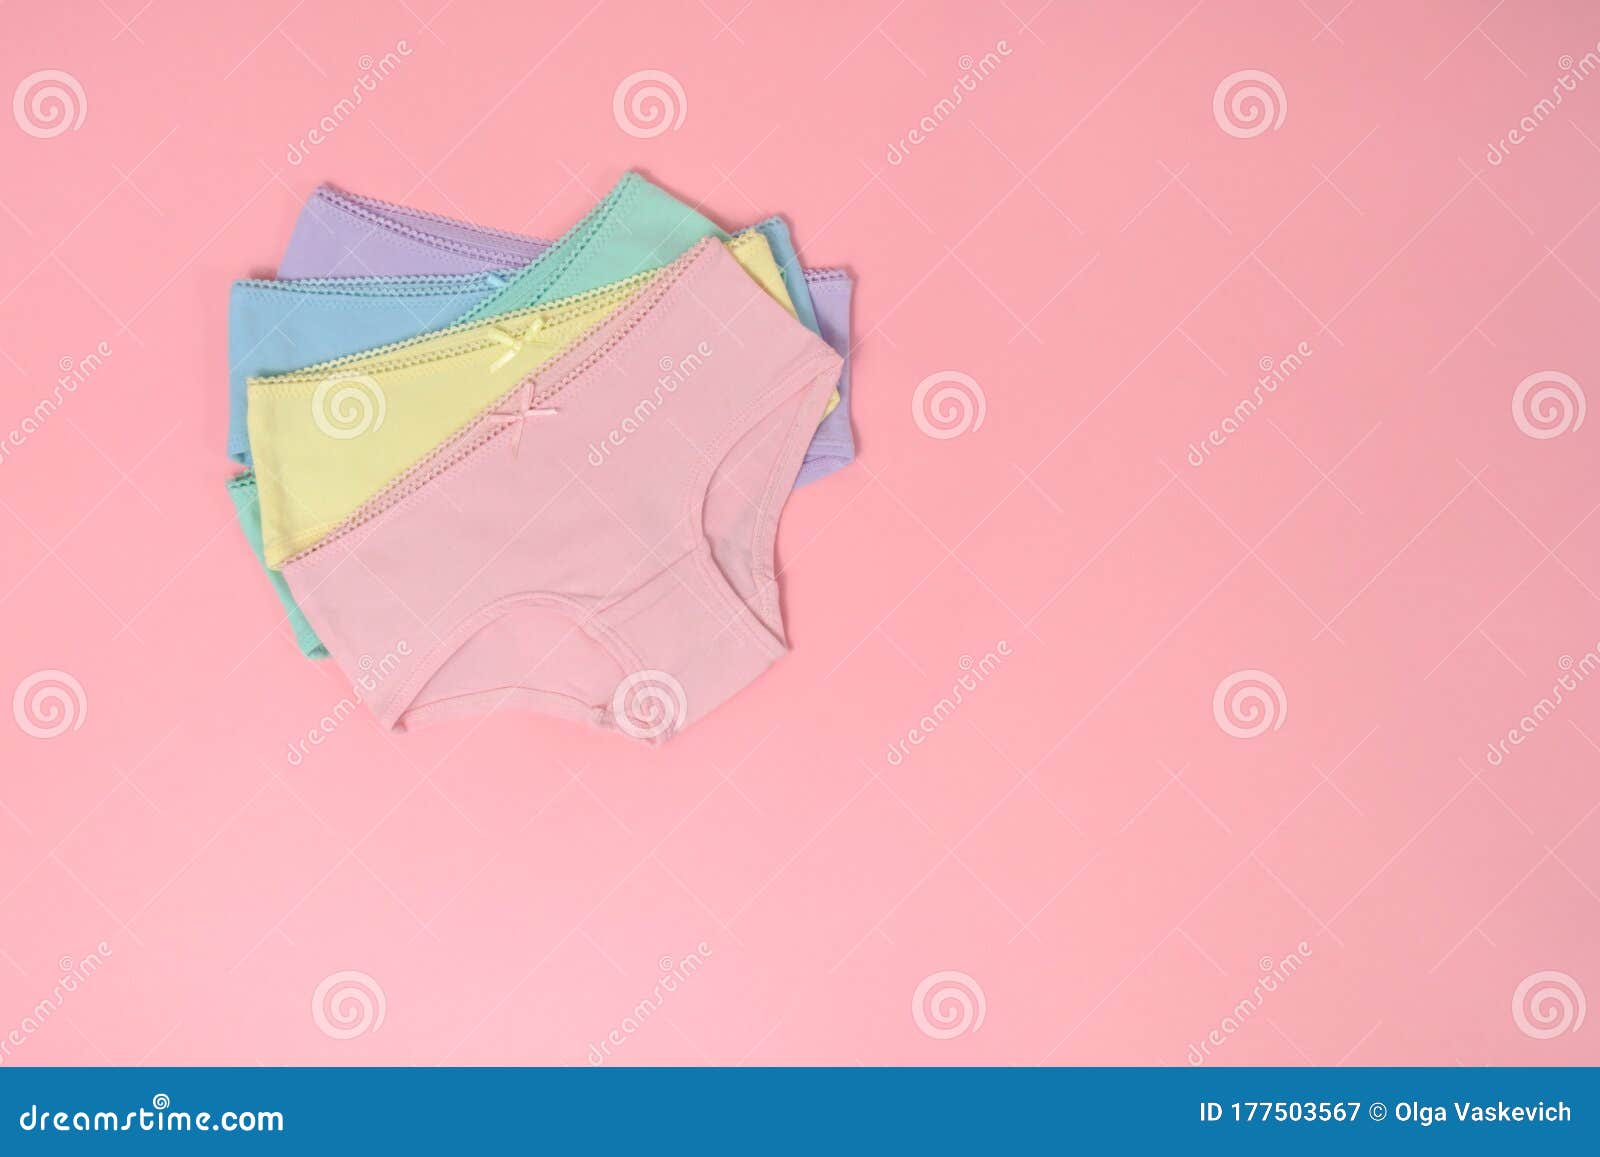 Multi Colored Cotton Panties For A Girl On A Pink Background Stock Image Image Of Colour 